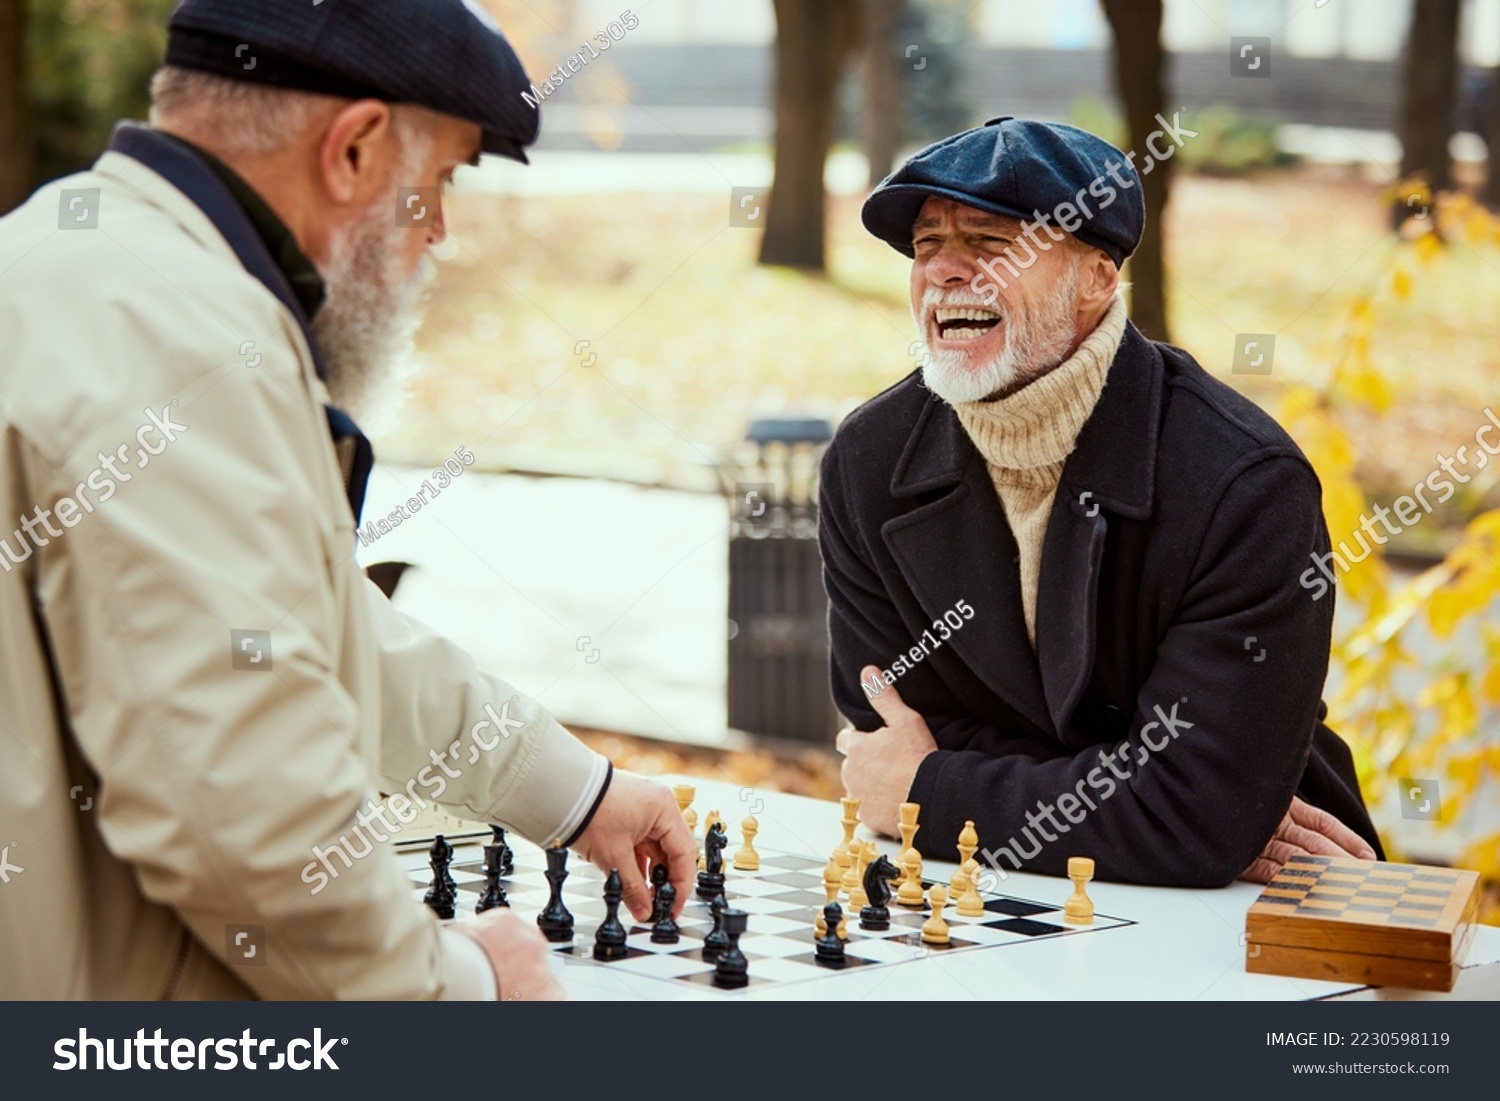 Portrait of two senior men playing chess in the park on a daytime in fall. Happy and delightful. Concept of leisure activity, friendship, sport, autumn season, game, entertainment, old generation #2230598119